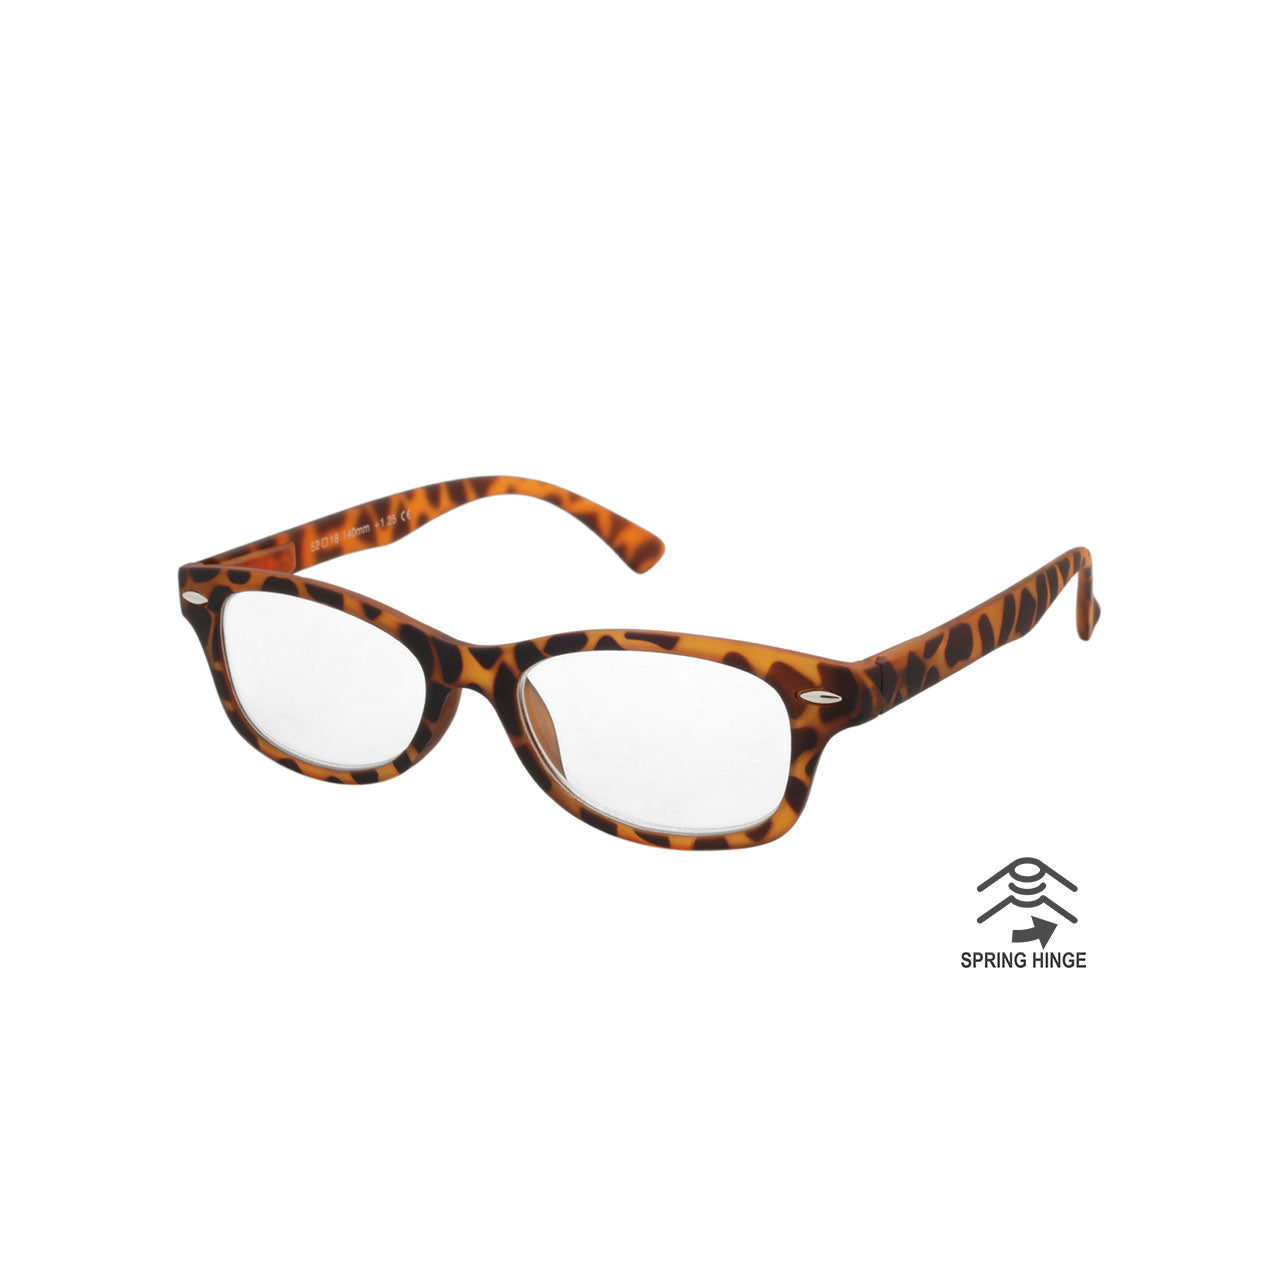 Fashion Gender Neutral Reading Glasses - Tortoise Soft Finish Frame with Two Metal Pins, Tortoise Soft Finish Temple - Mellow Monkey